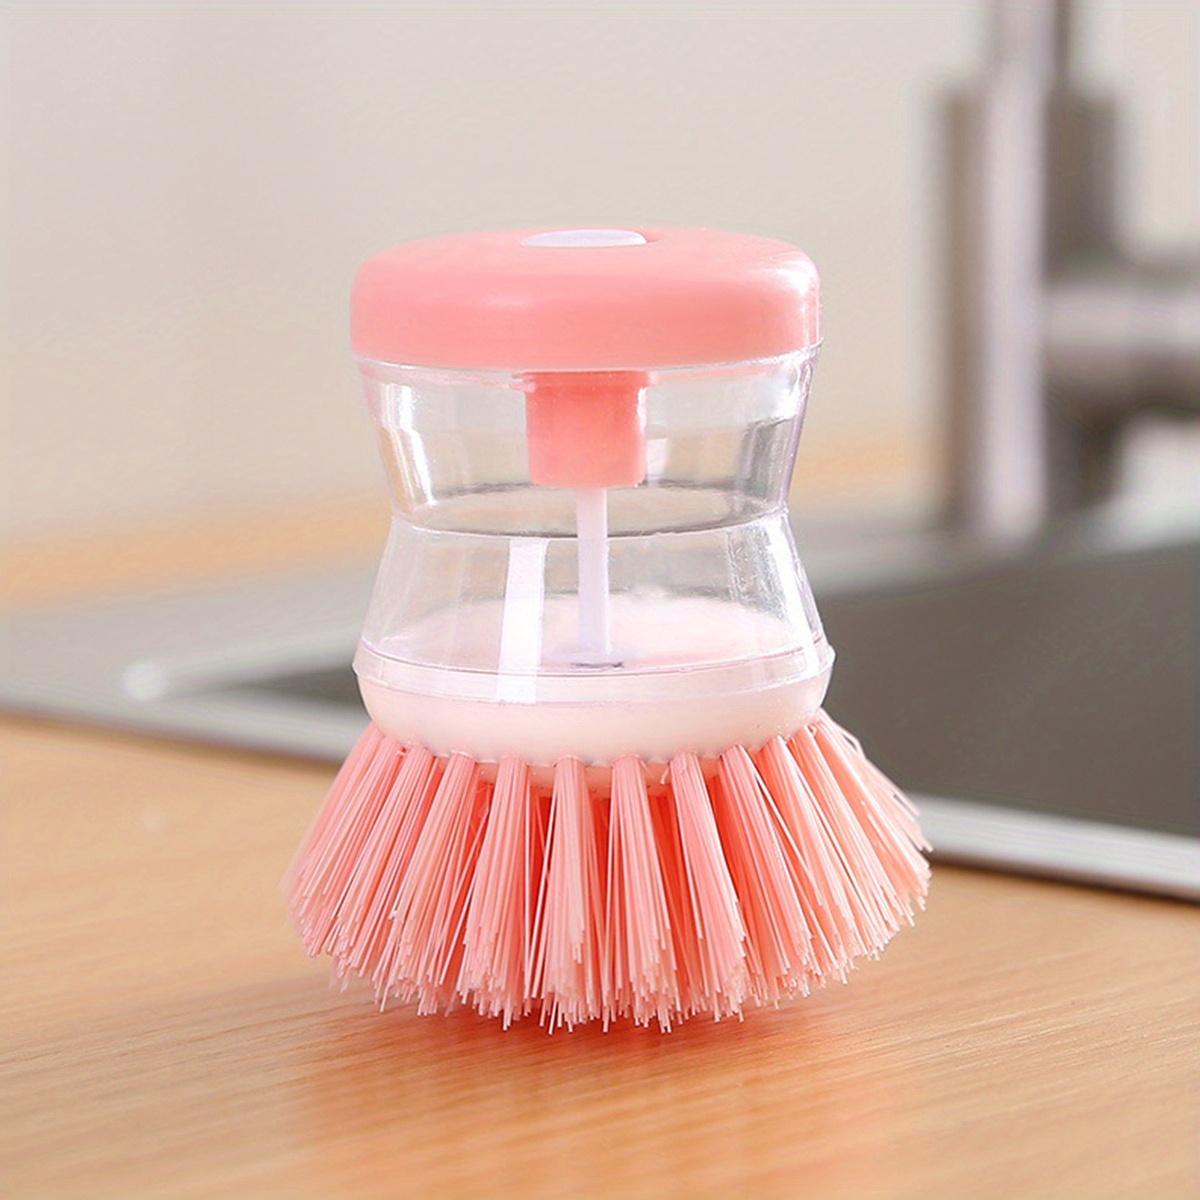 Dish Brush with Soap Dispenser for Dishes Pot Pan Kitchen Sink